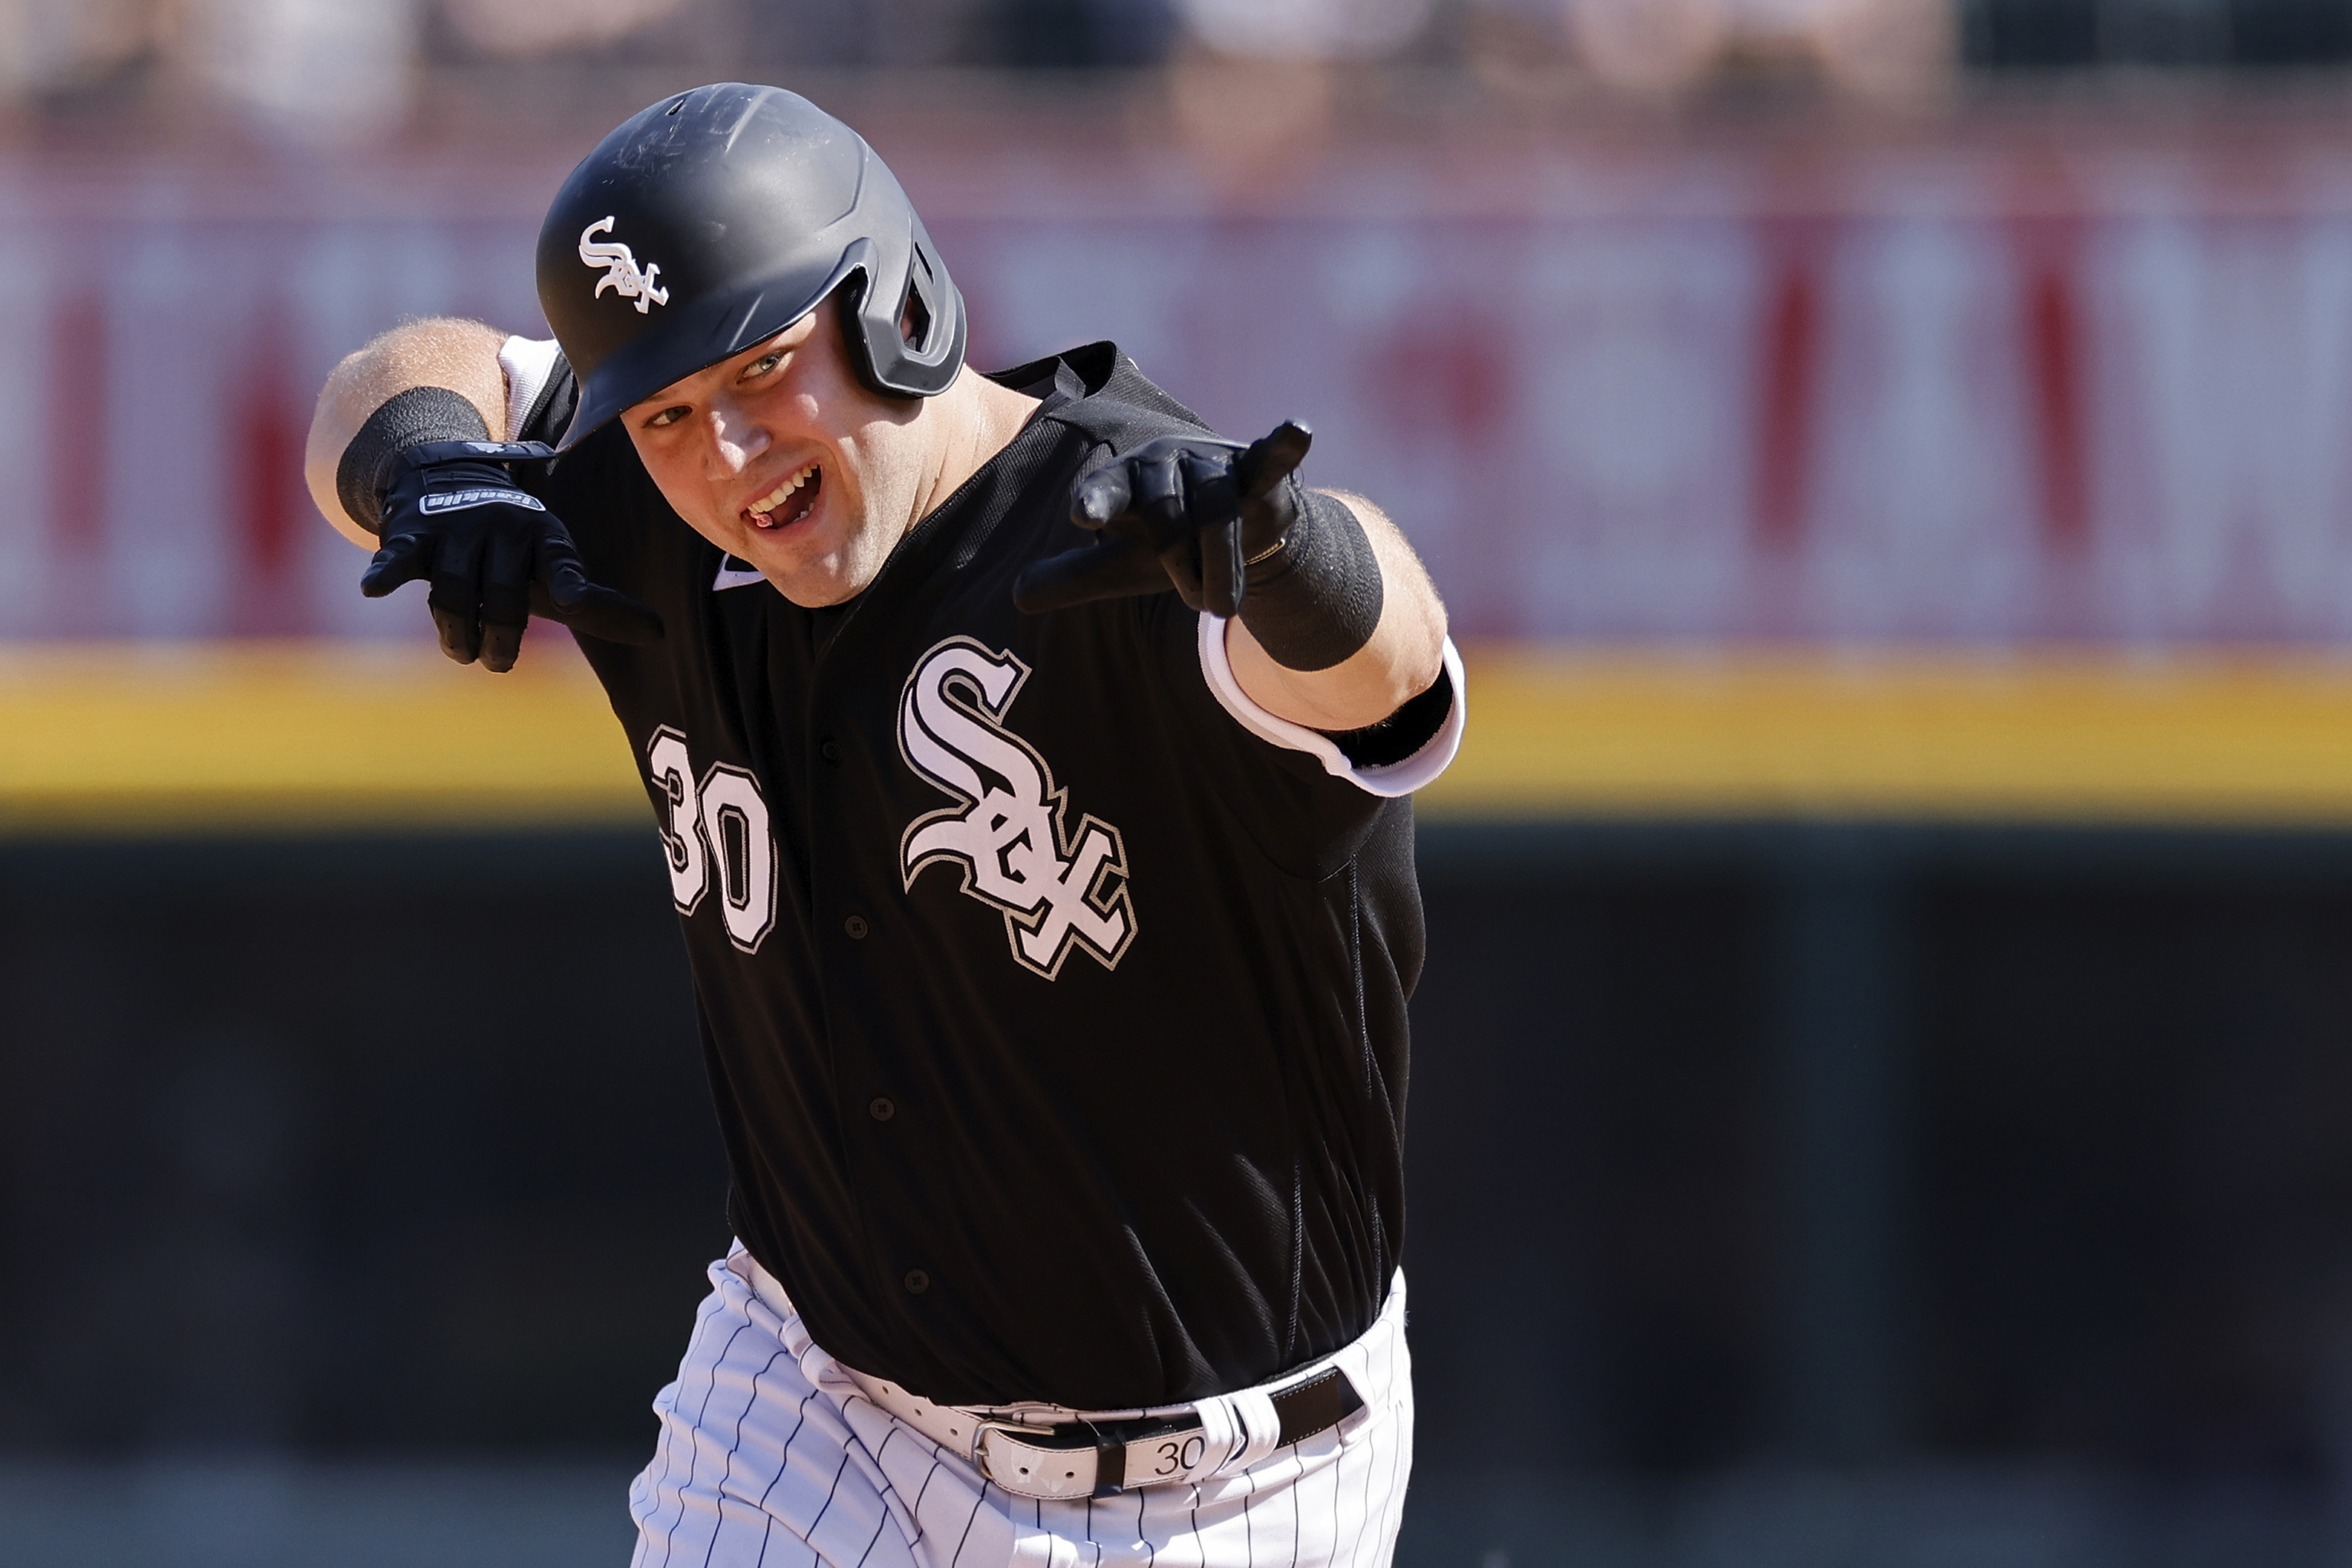 Andrus walks it off for White Sox in 5-4 win over Red Sox